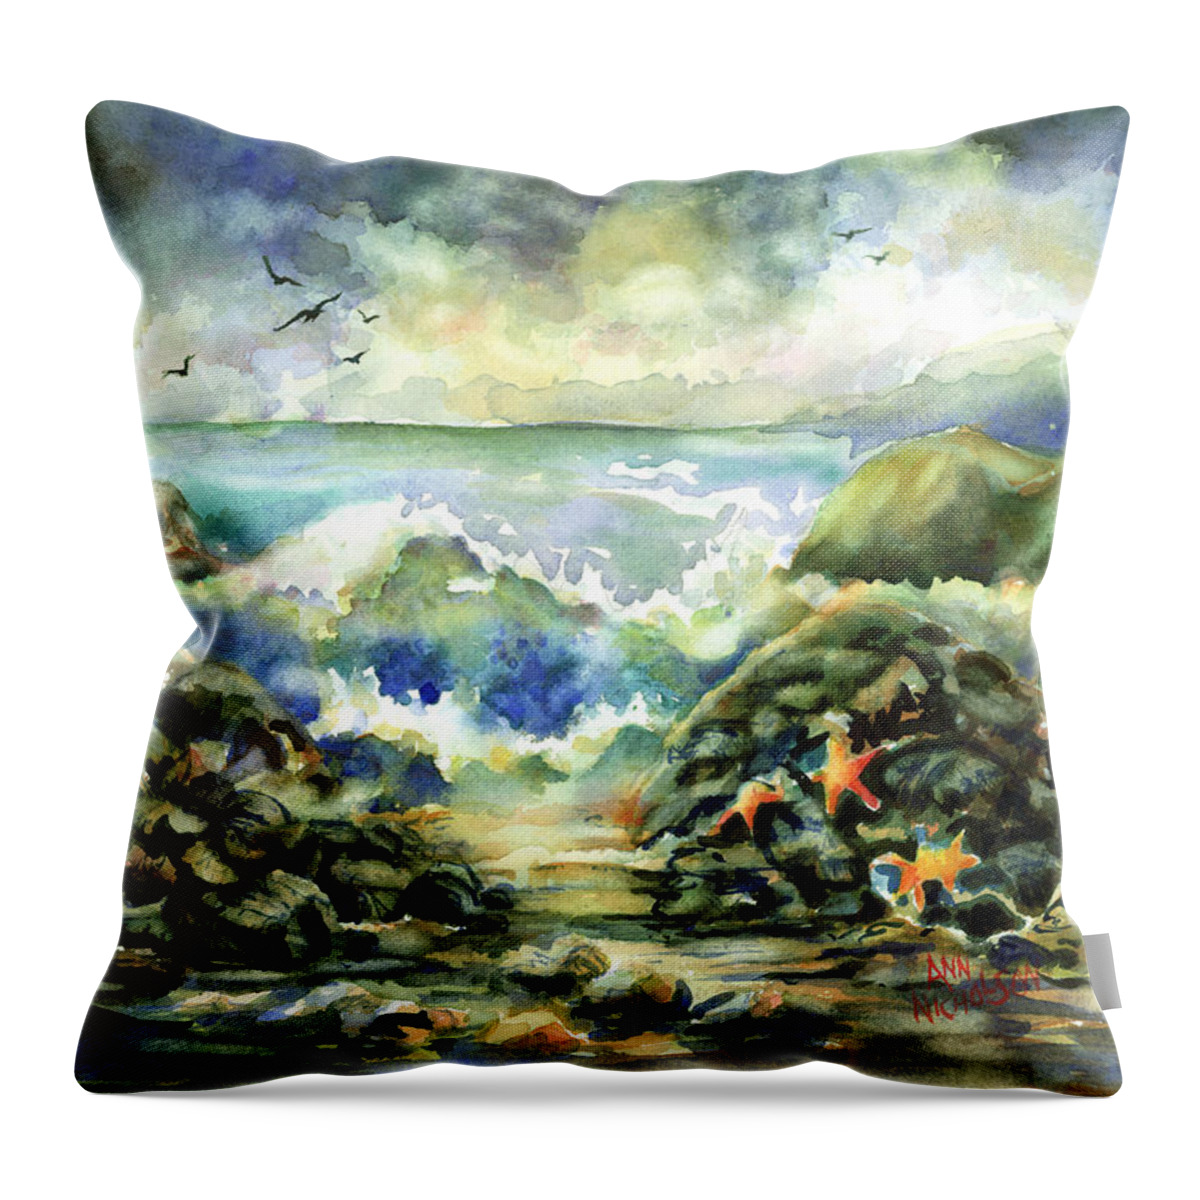 Watercolor Throw Pillow featuring the painting On The Rocks by Ann Nicholson